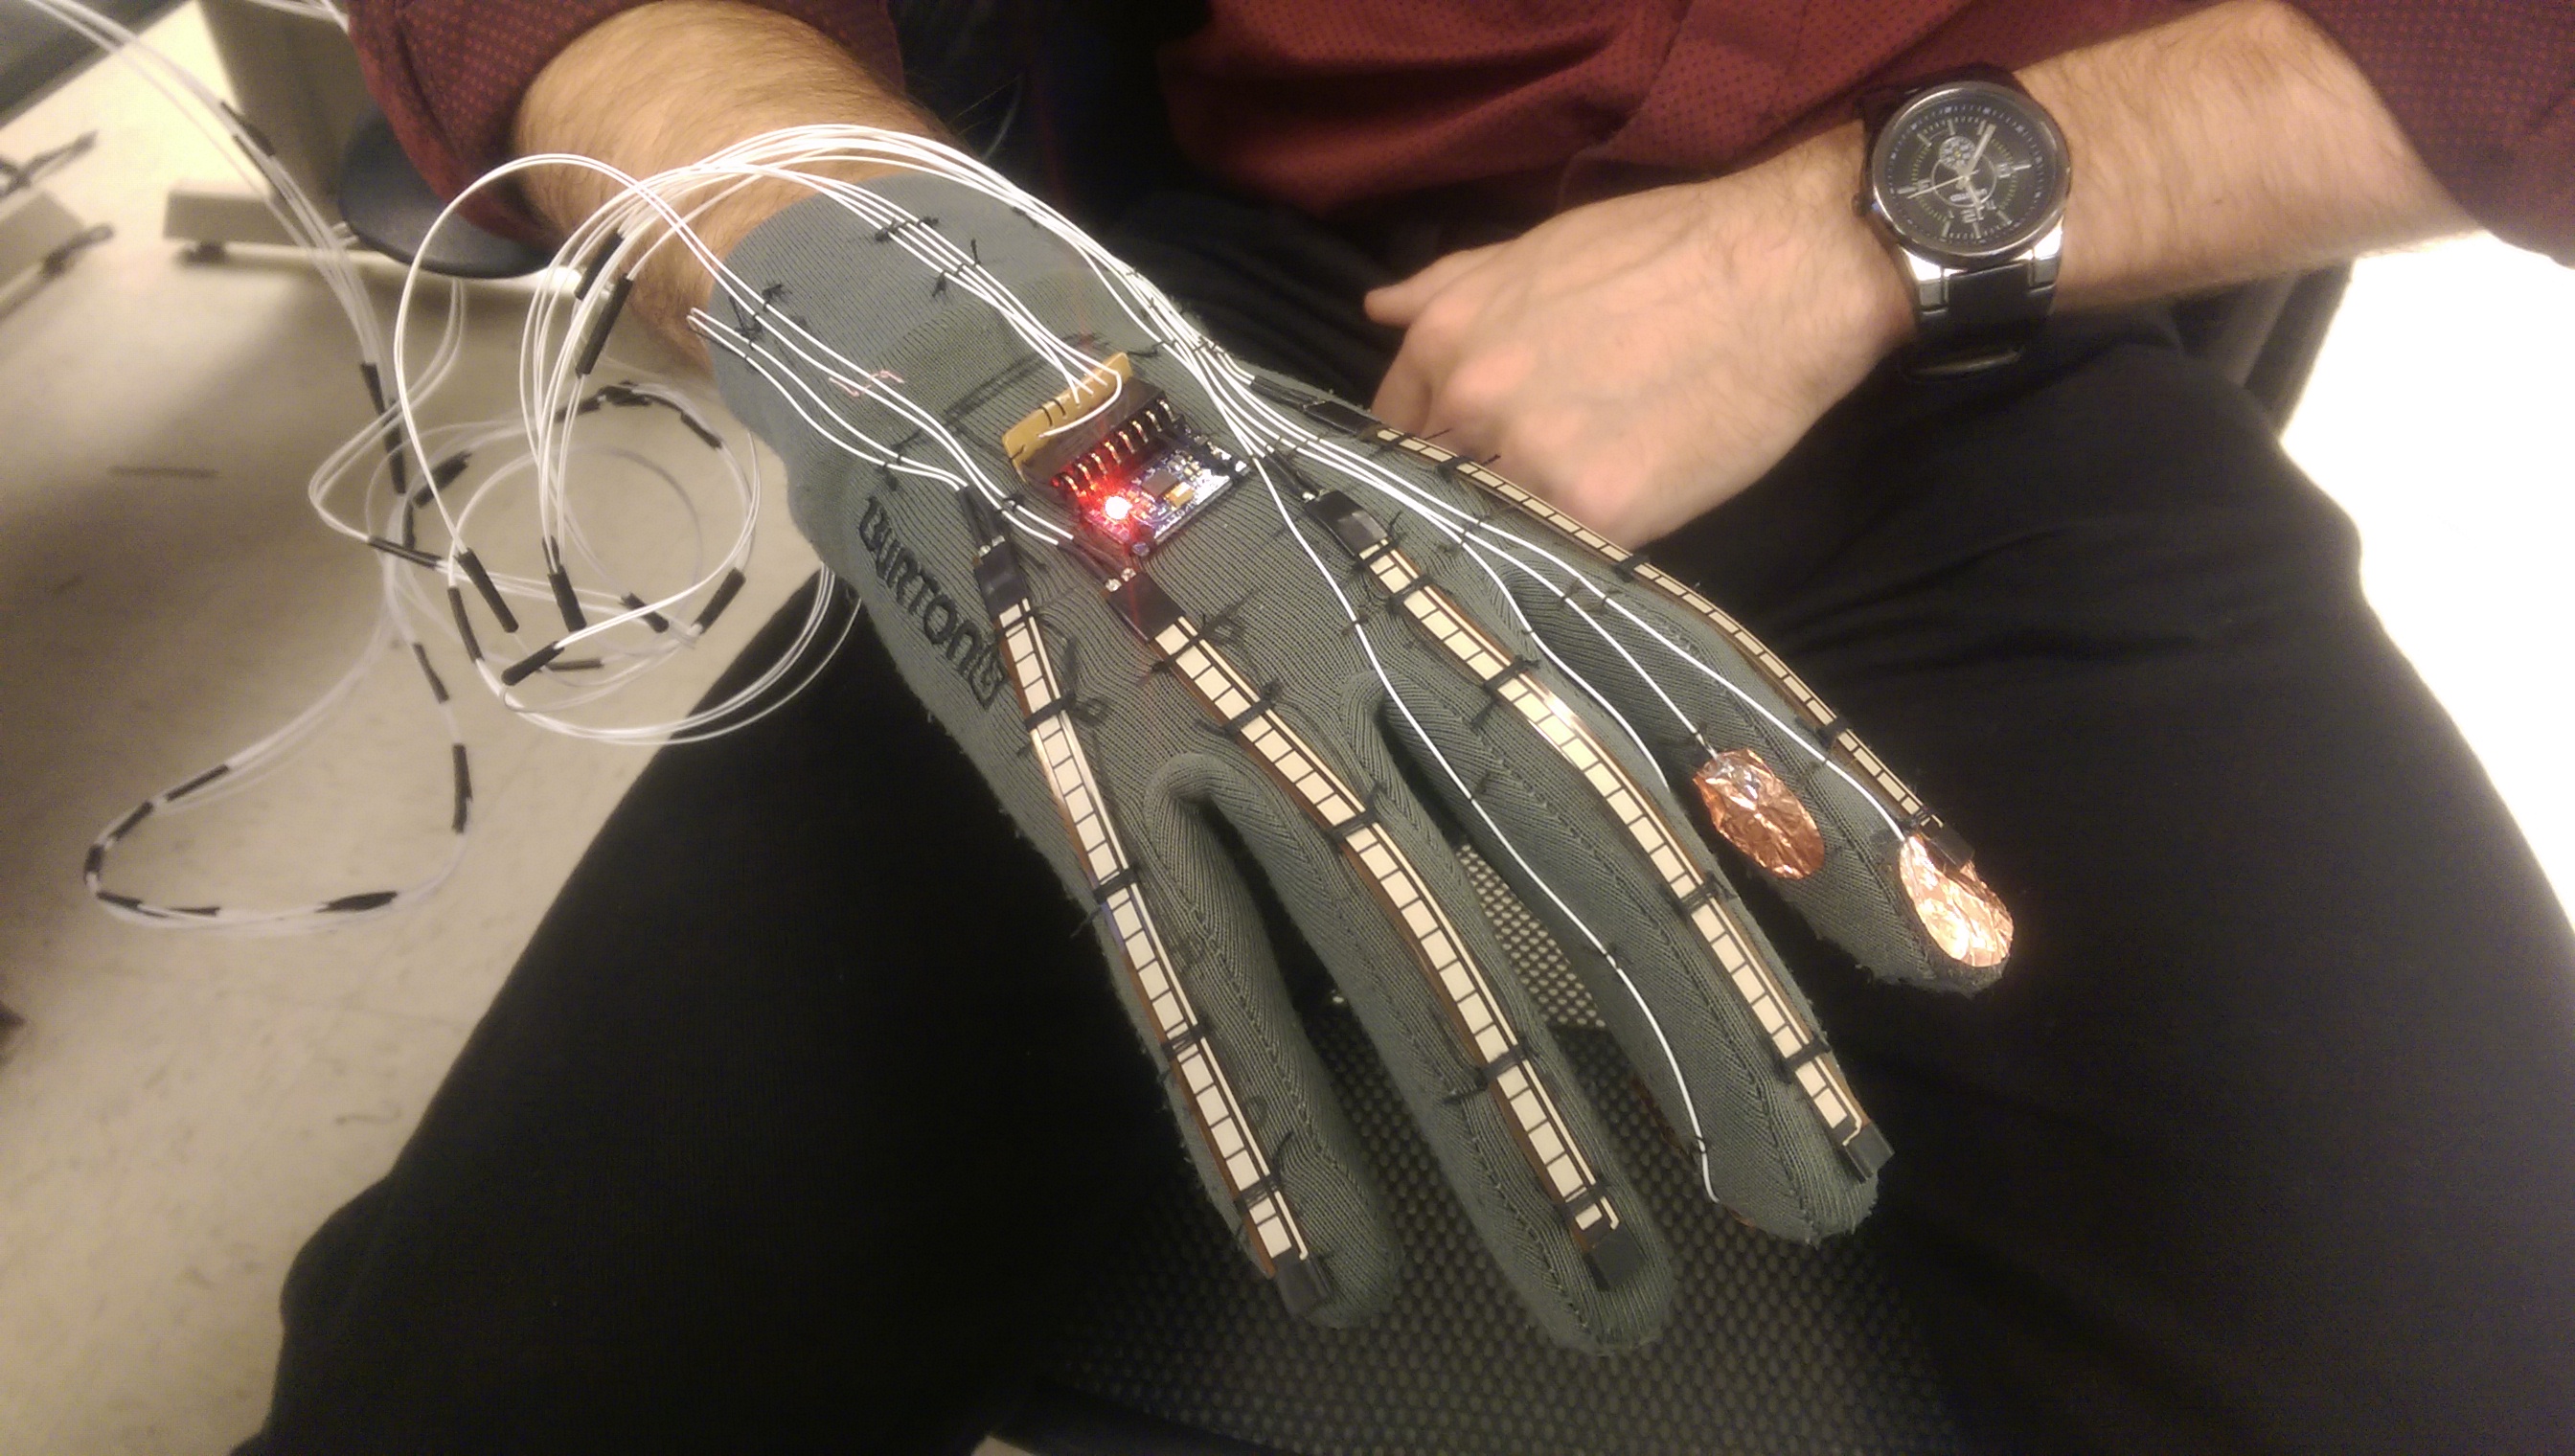 futuristic-smart-glove-can-translate-sign-language-into-text-and-speech-5